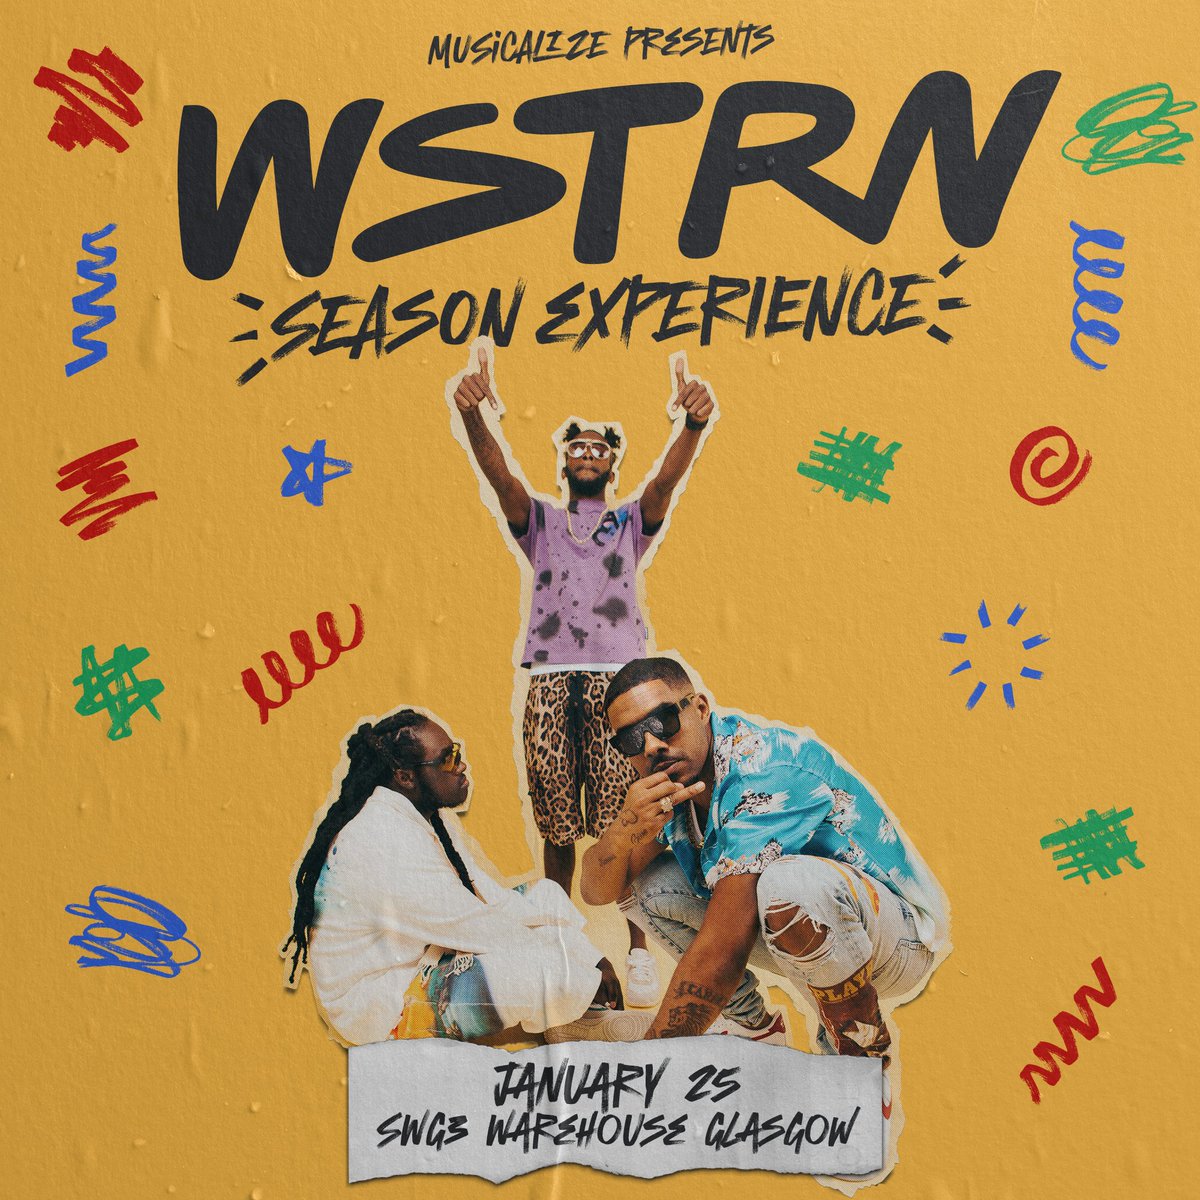 𝗝𝗨𝗦𝗧 𝗔𝗡𝗡𝗢𝗨𝗡𝗖𝗘𝗗 @Musicalize bring @WSTRNmusic to the Warehouse on Wed 25 Jan 2023 as part of the WSTRN Season Experience tour. 𝗣𝗿𝗲-𝘀𝗮𝗹𝗲 Thu 20 Oct at 9am 𝗢𝗻 𝘀𝗮𝗹𝗲 Fri 21 Oct at 9am 𝗣𝗥𝗘-𝗦𝗔𝗟𝗘 𝗦𝗜𝗚𝗡 𝗨𝗣 → swg3.tv/pre-sale-sign-…